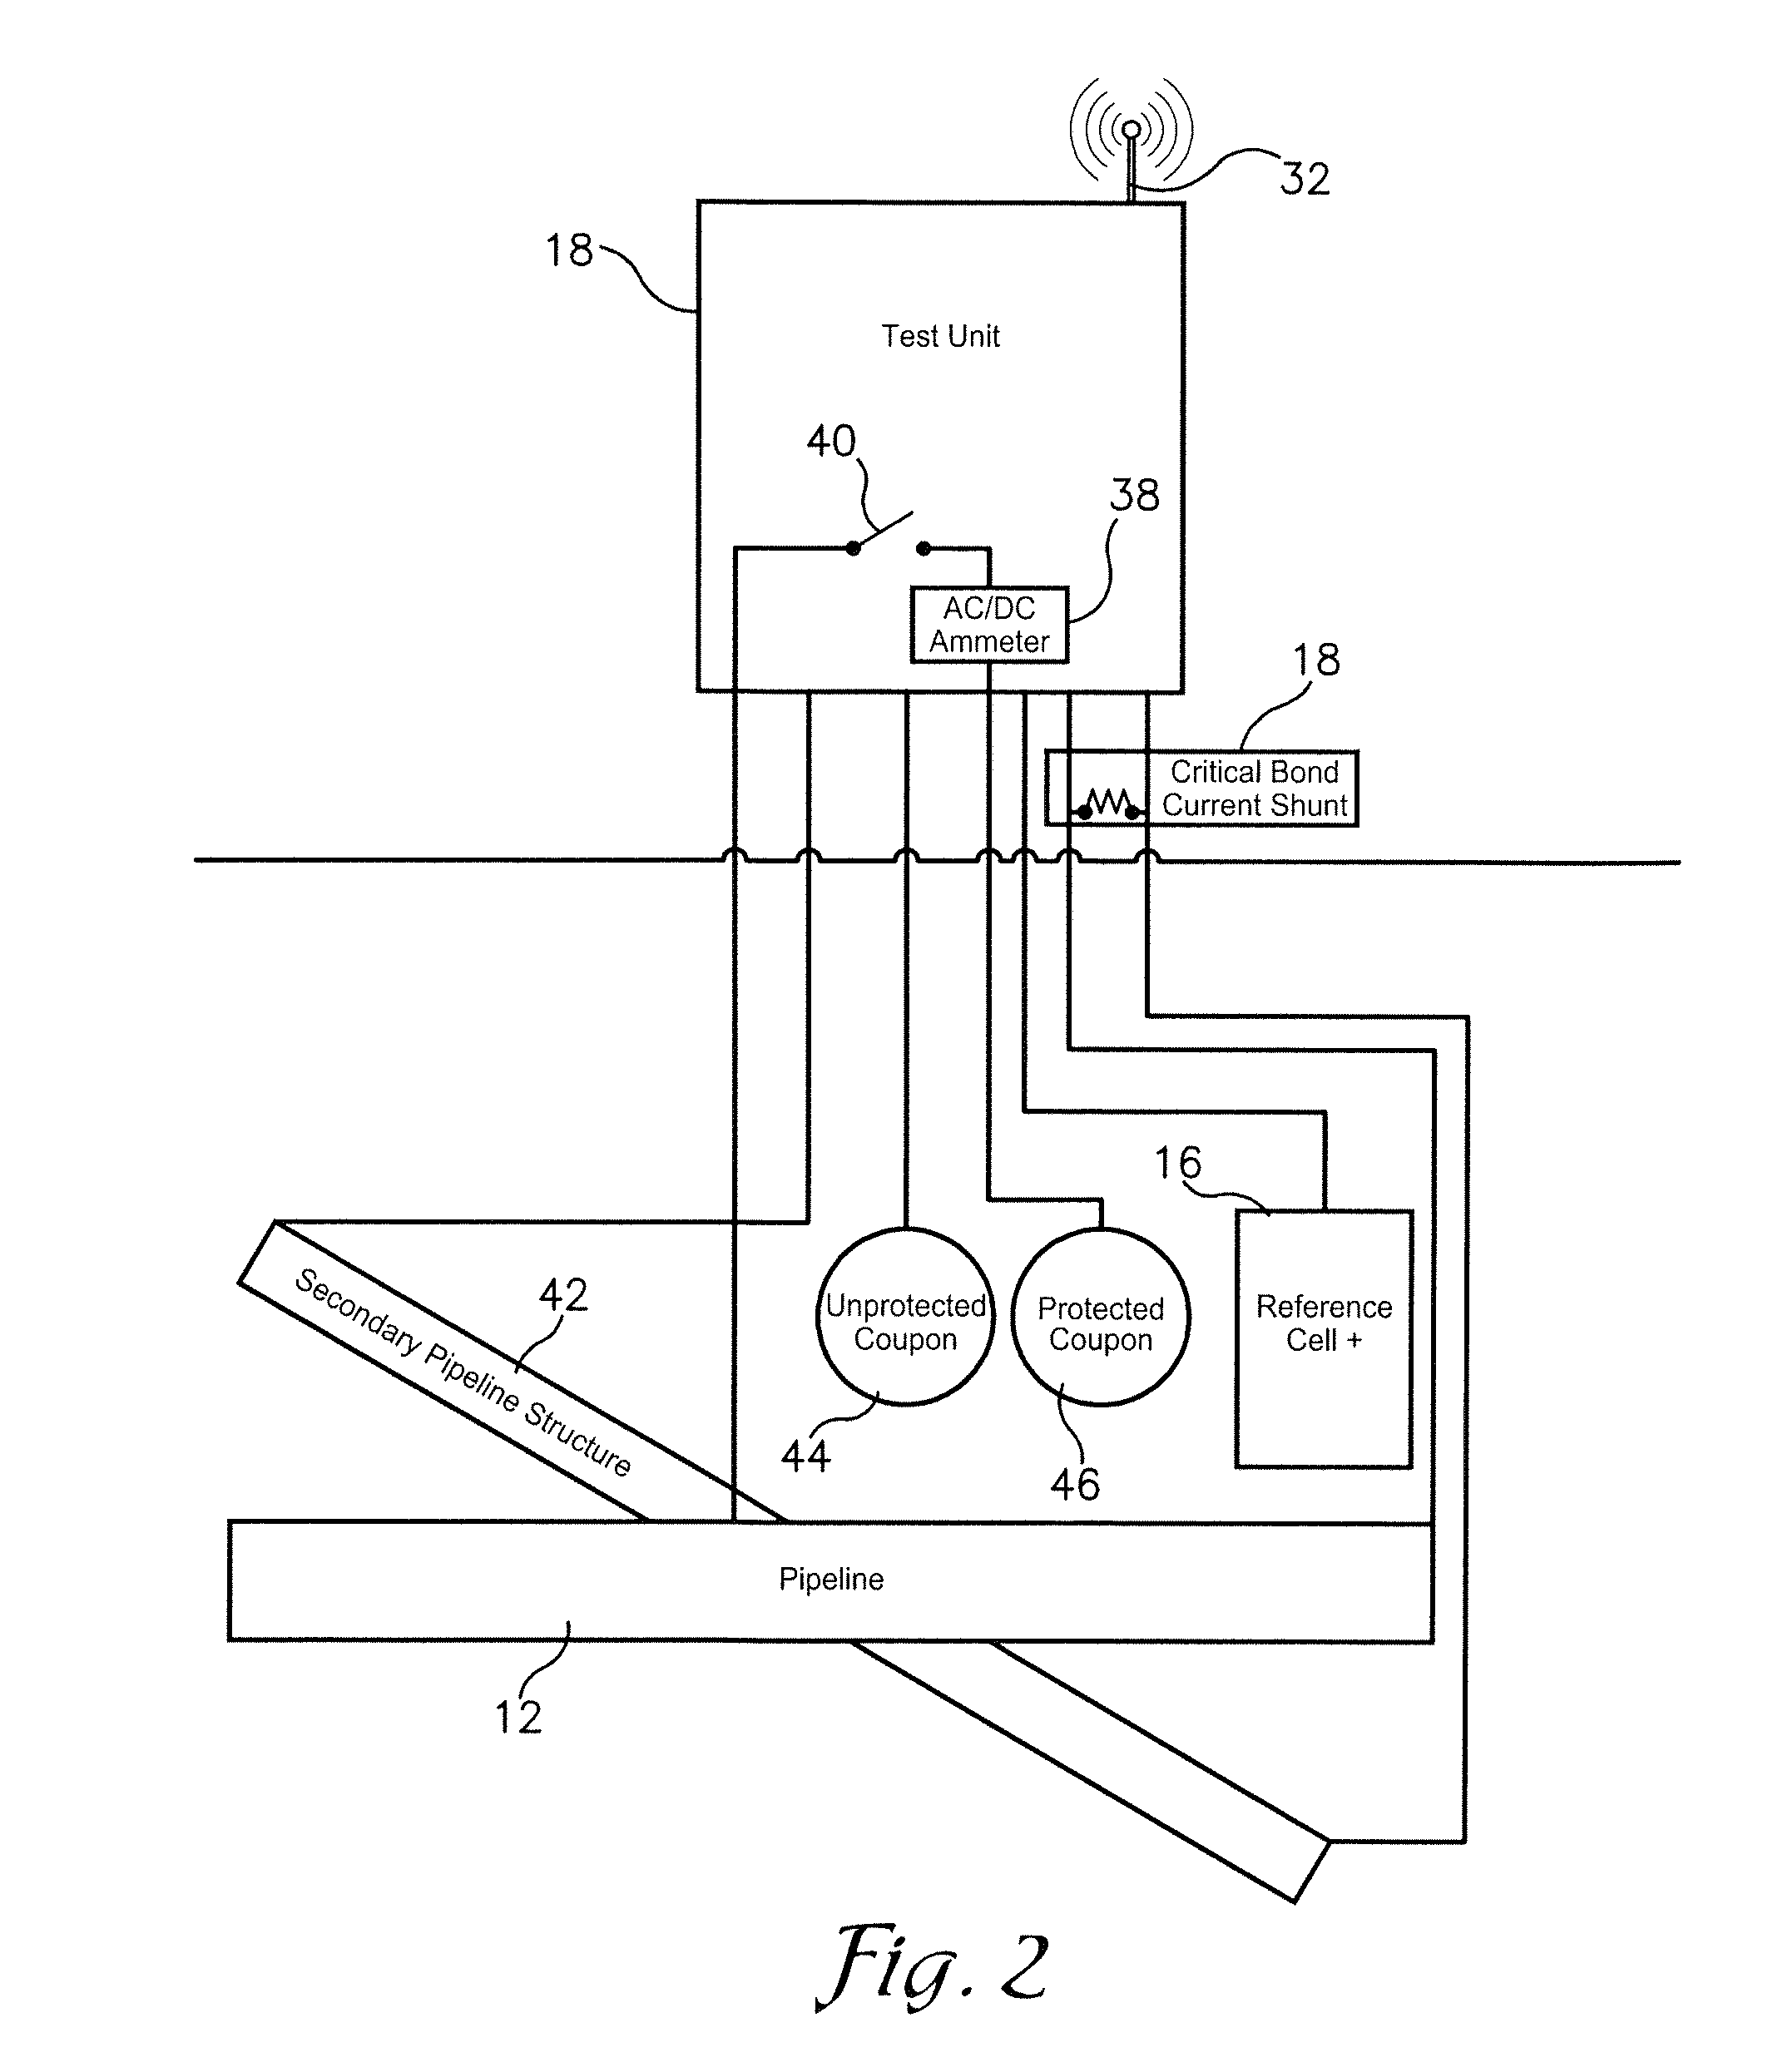 Apparatus and system for automated pipeline testing